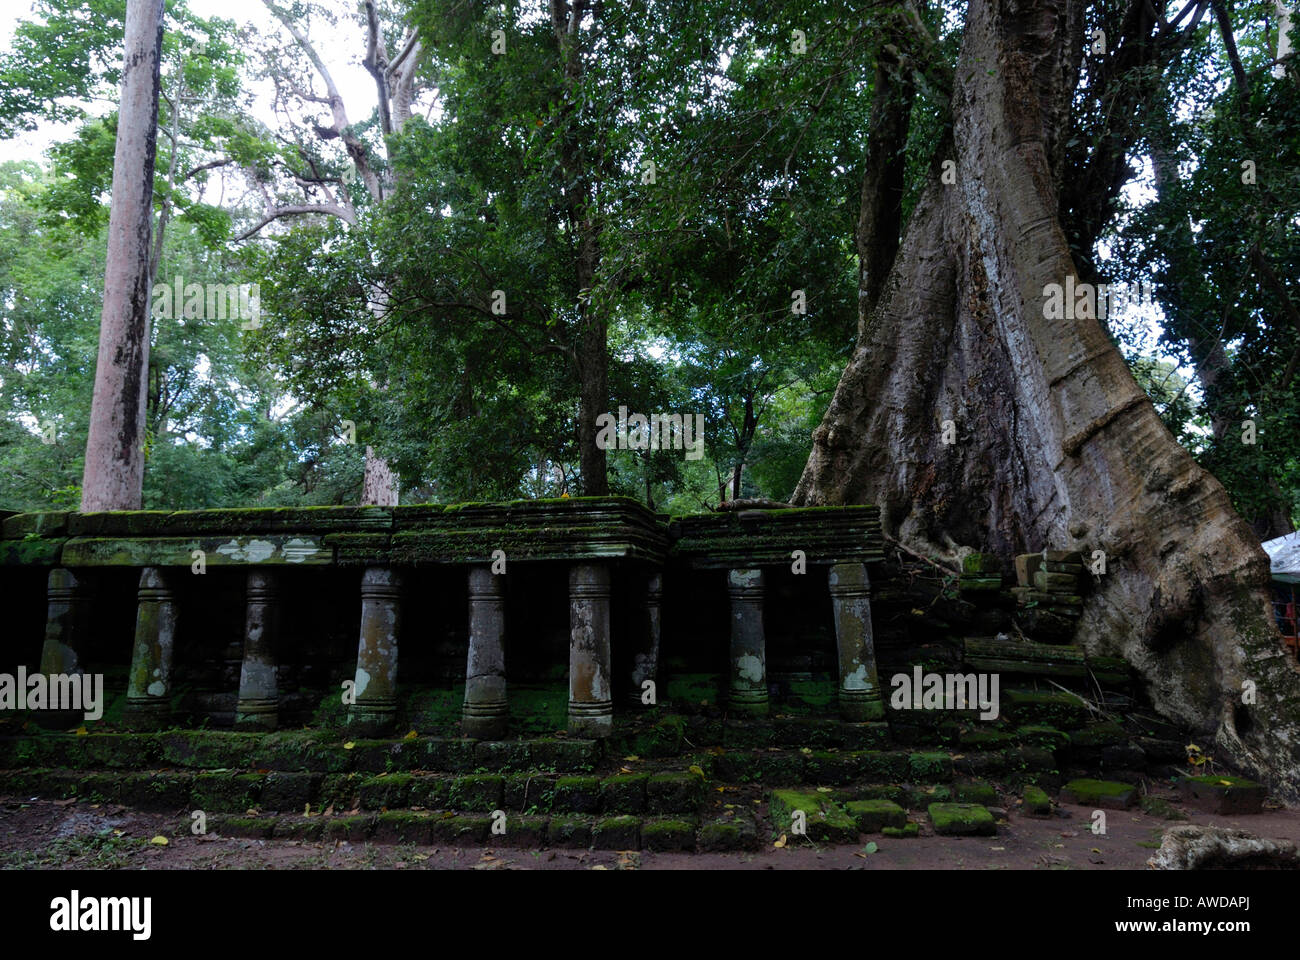 Rainforest growing over the ruins of the ancient city Angkor Thom, Cambodia Stock Photo